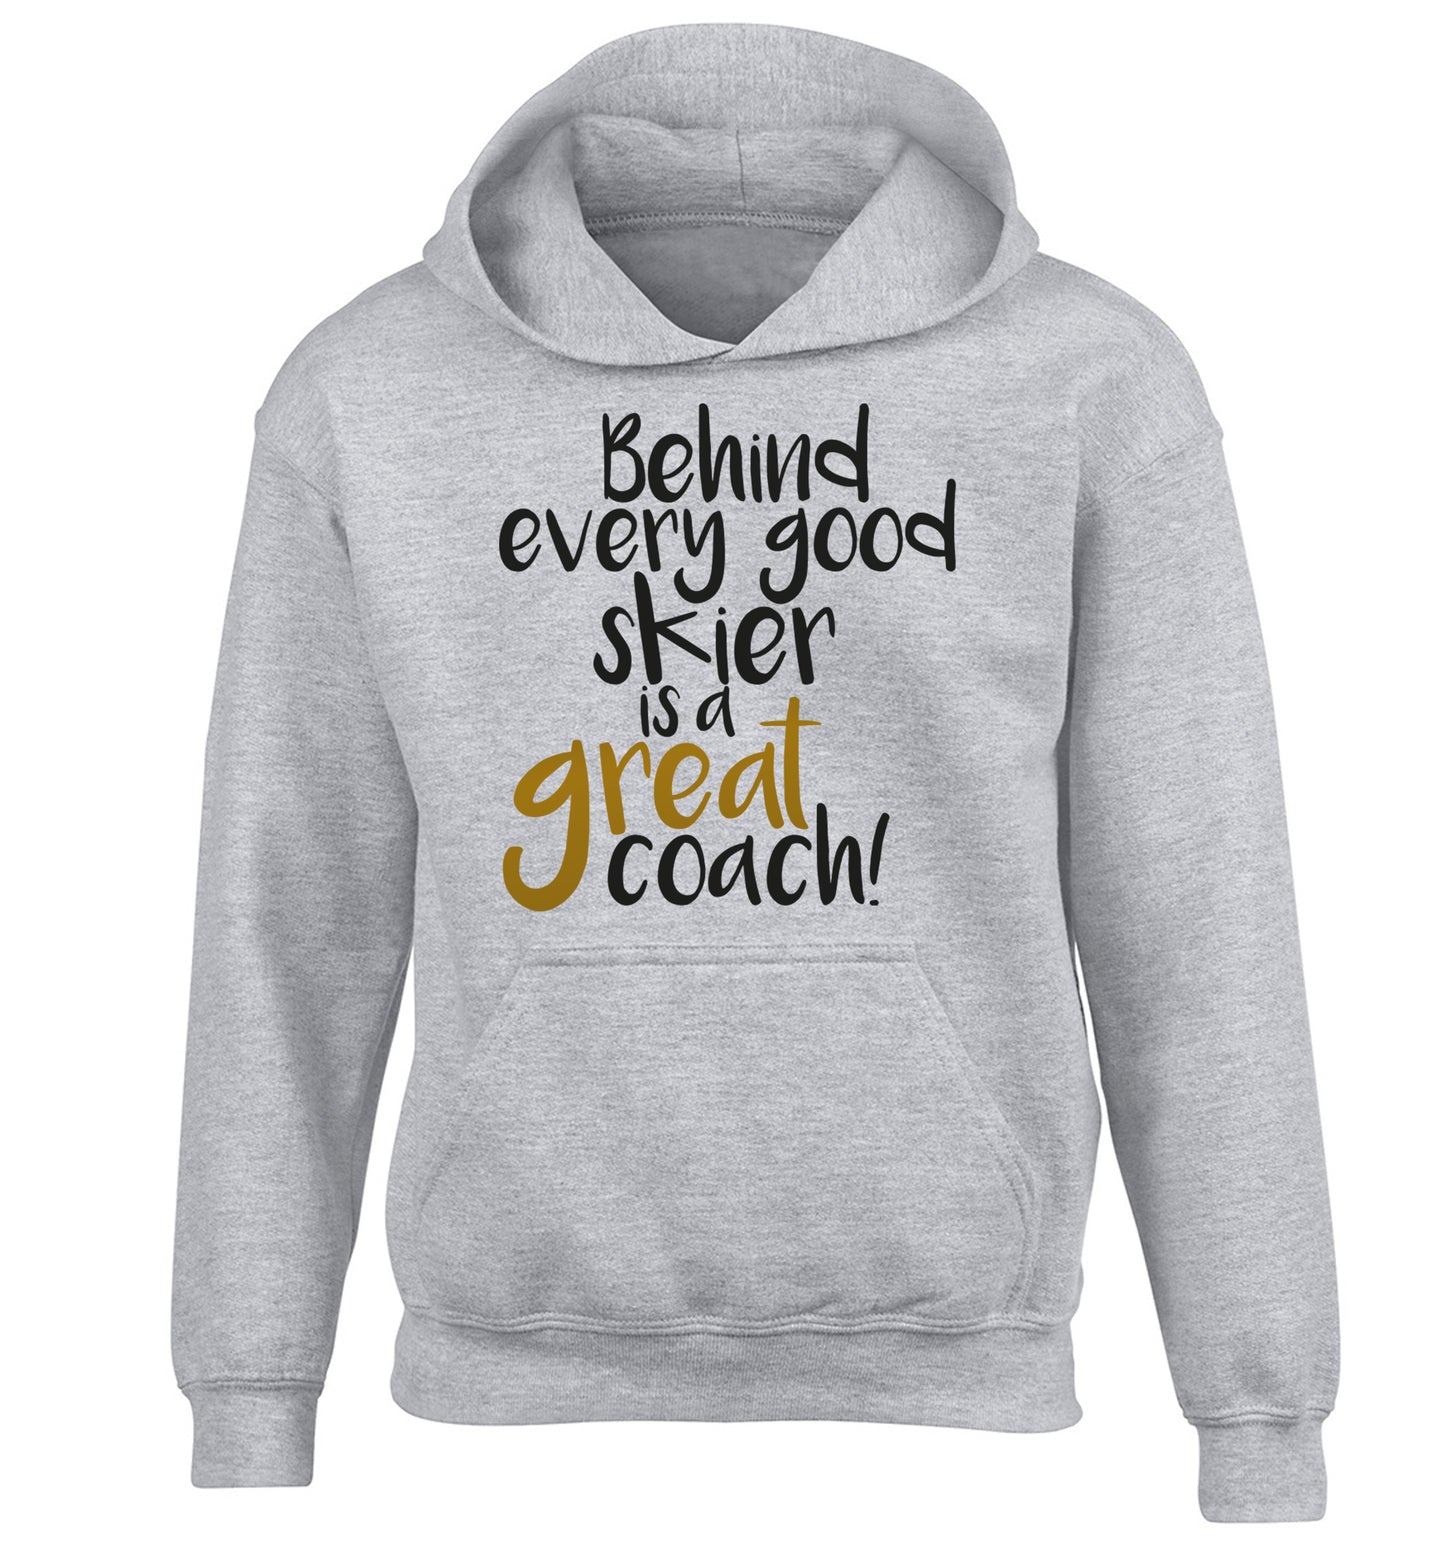 Behind every good skier is a great coach! children's grey hoodie 12-14 Years